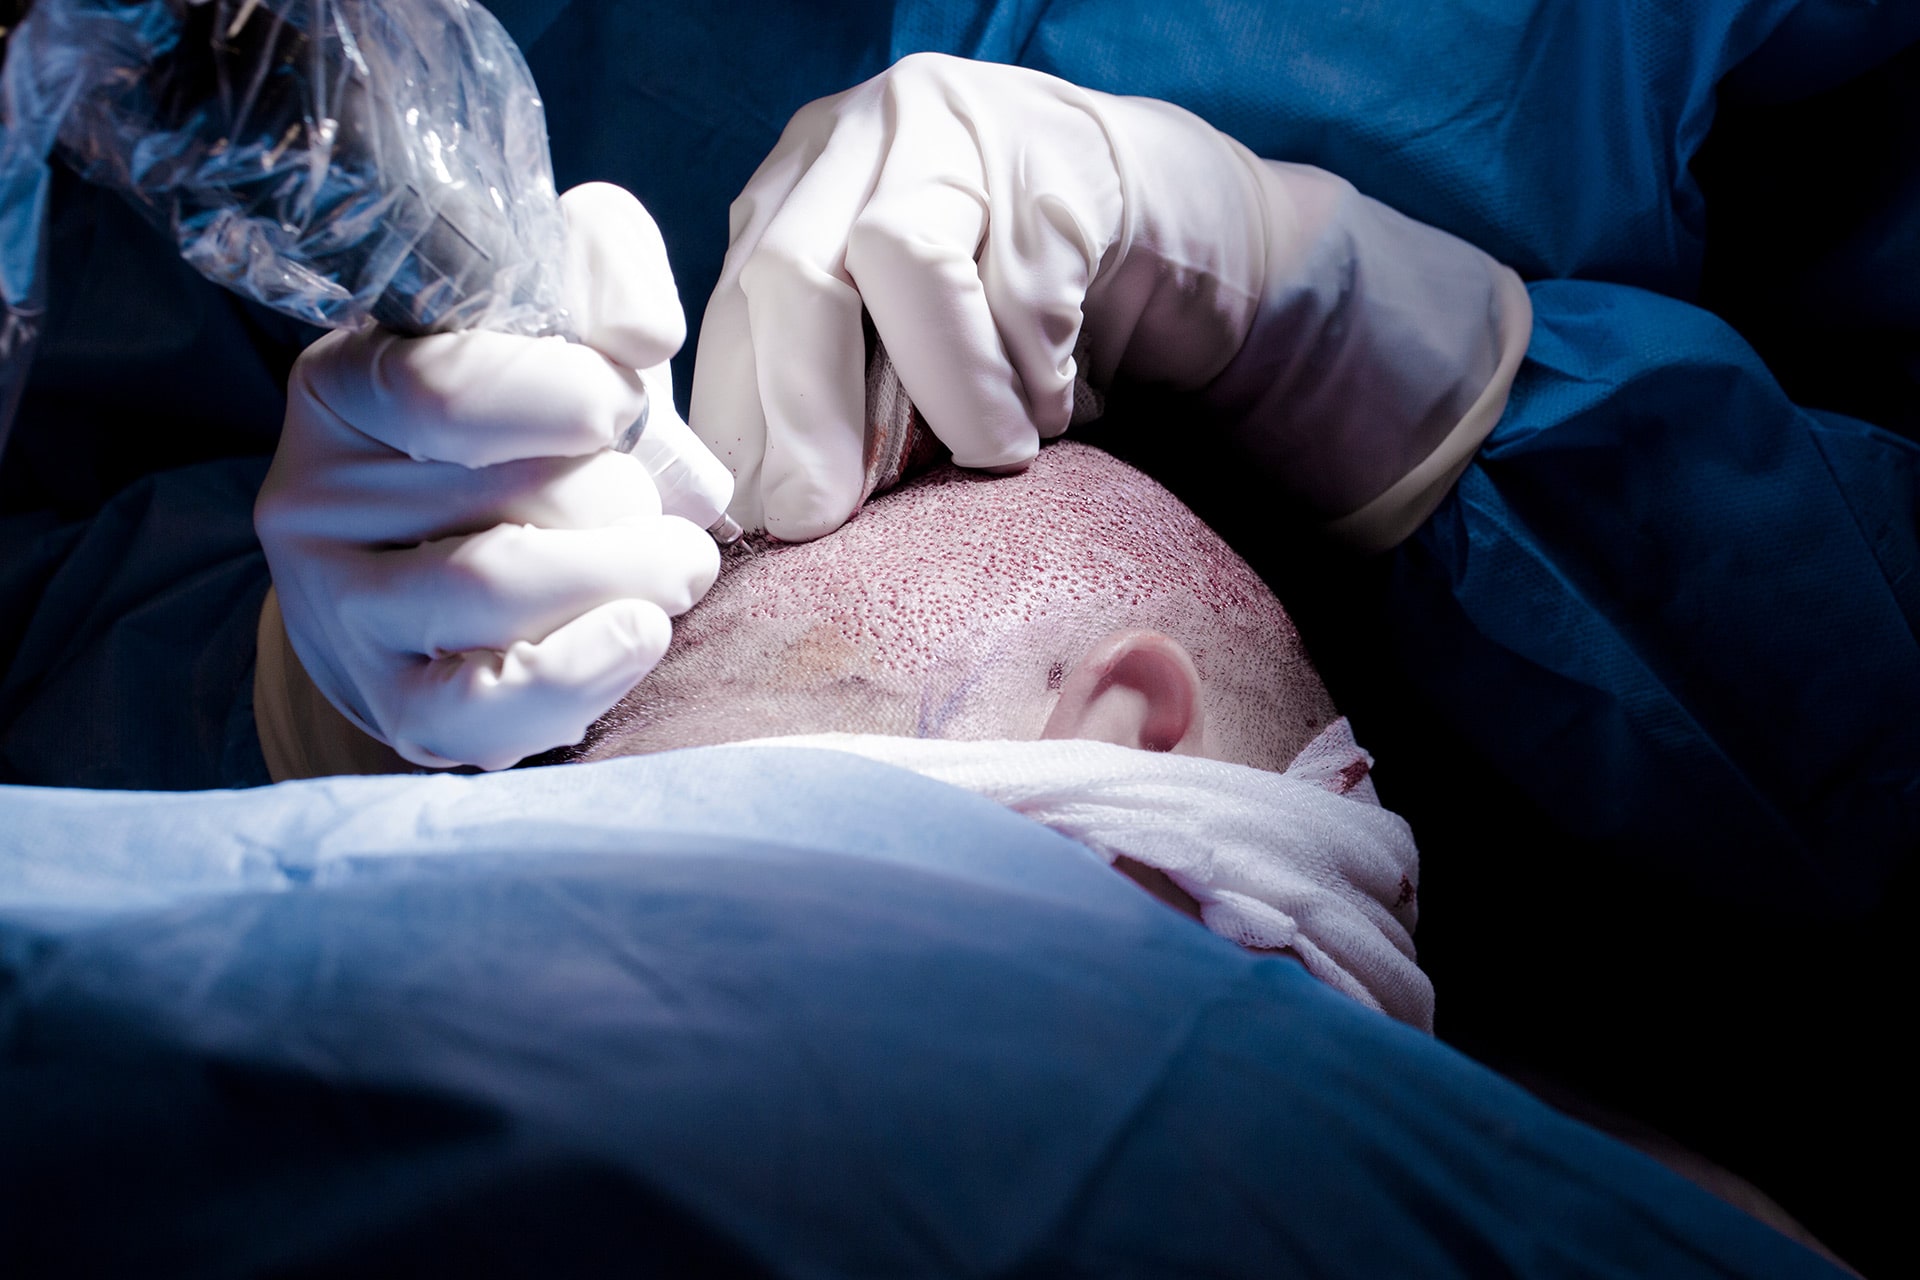 Hair Transplant Scar Treatment With Smp In London